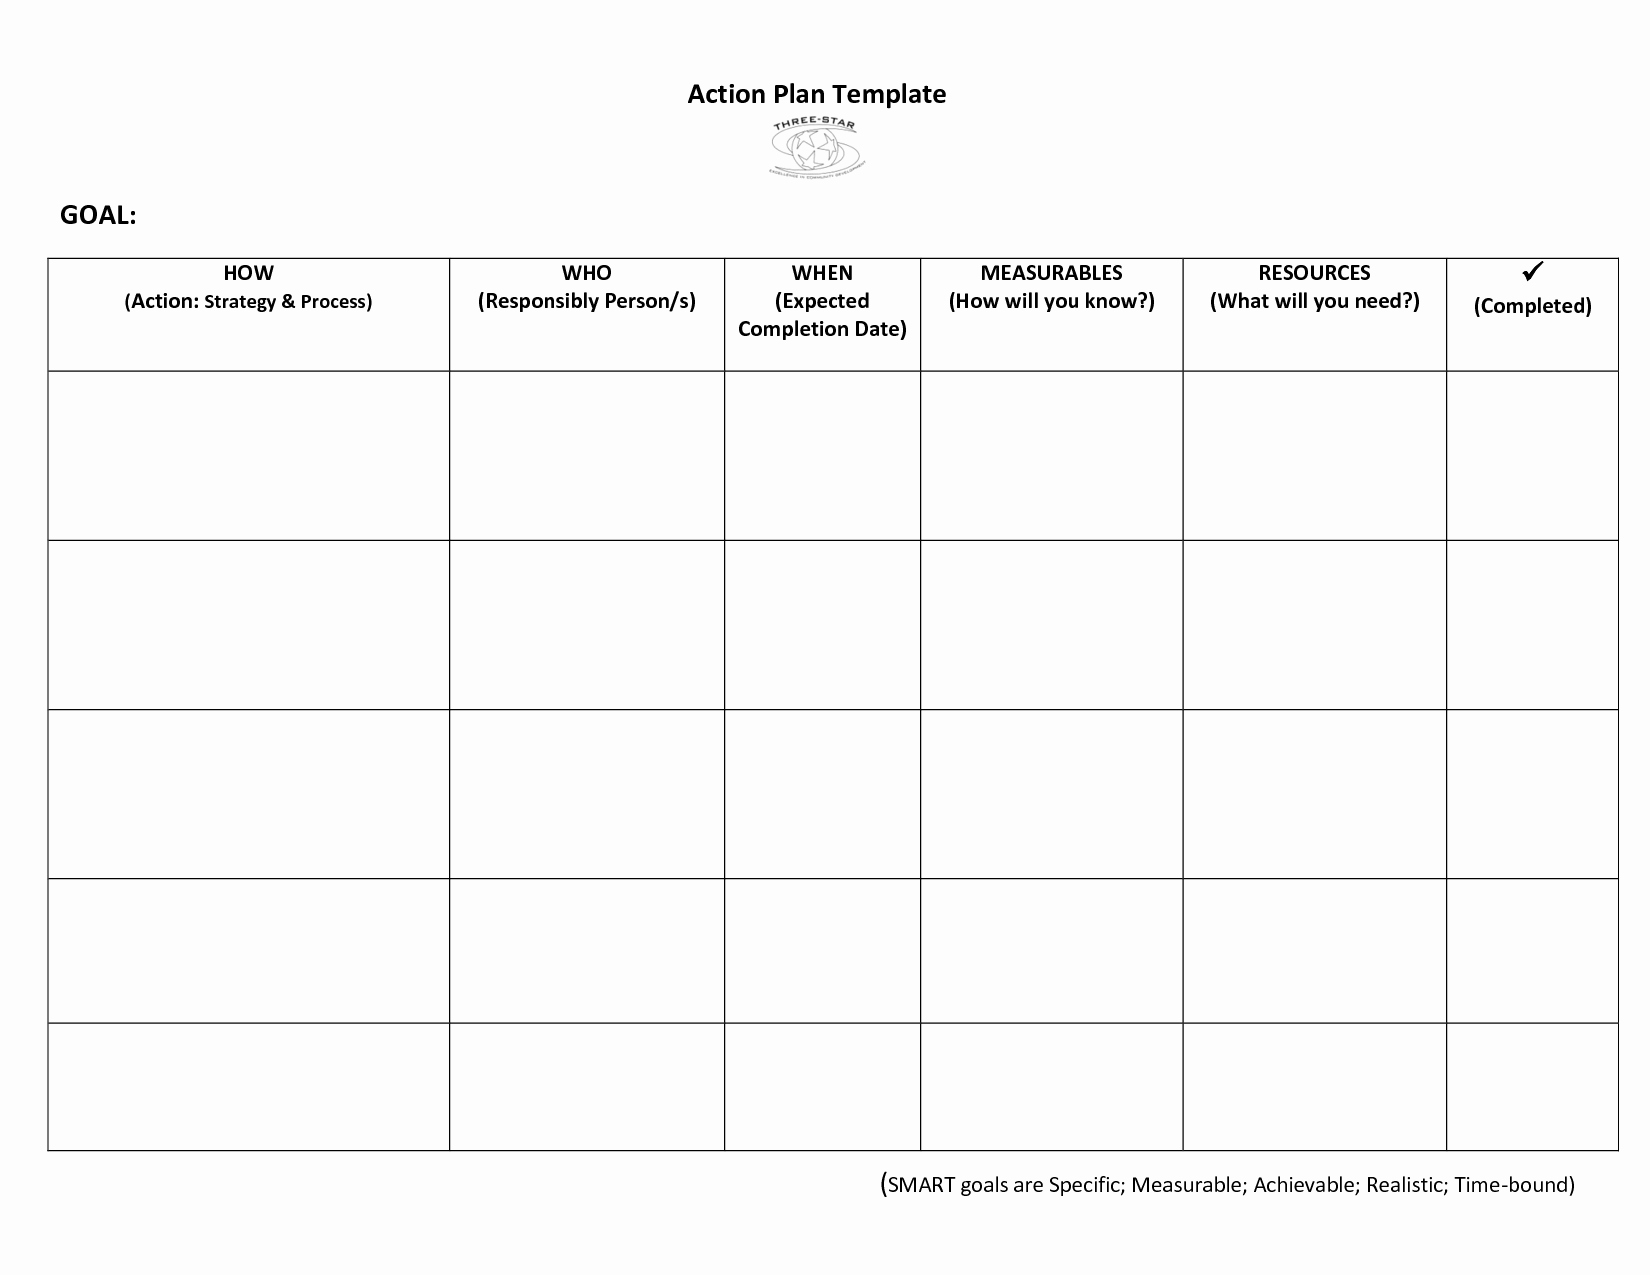 Action Plan Templates Excel Lovely 20 Brilliant Samples to Help You Create Business Action